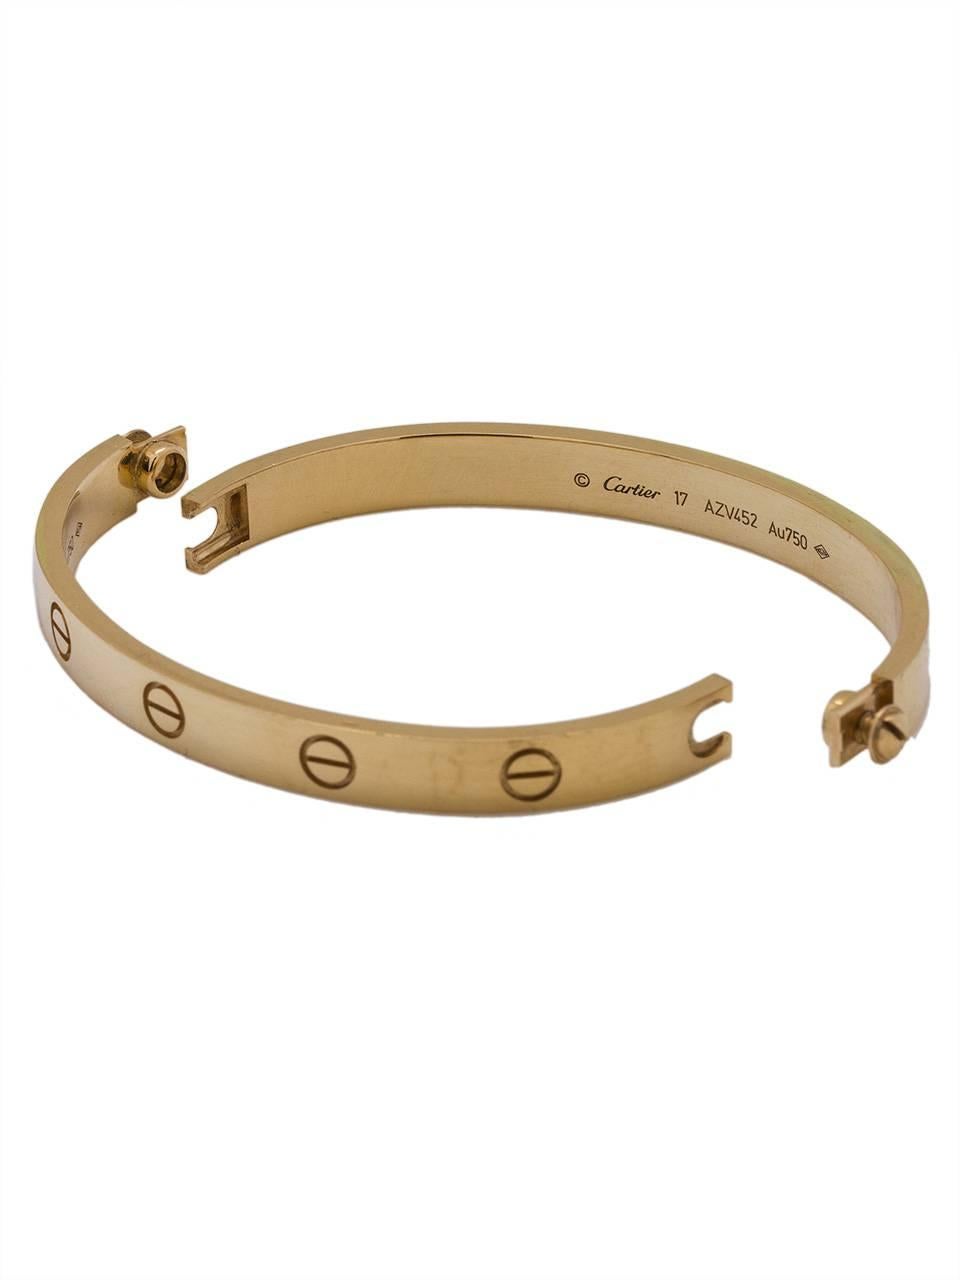 Cartier 18K YG “Love Bracelet” size 17 in mint pre-owned condition, newer style complete with original Cartier box, certificate and screwdriver. New style that screws do not remove all the way so will not get lost. Size 17 is one of the most popular